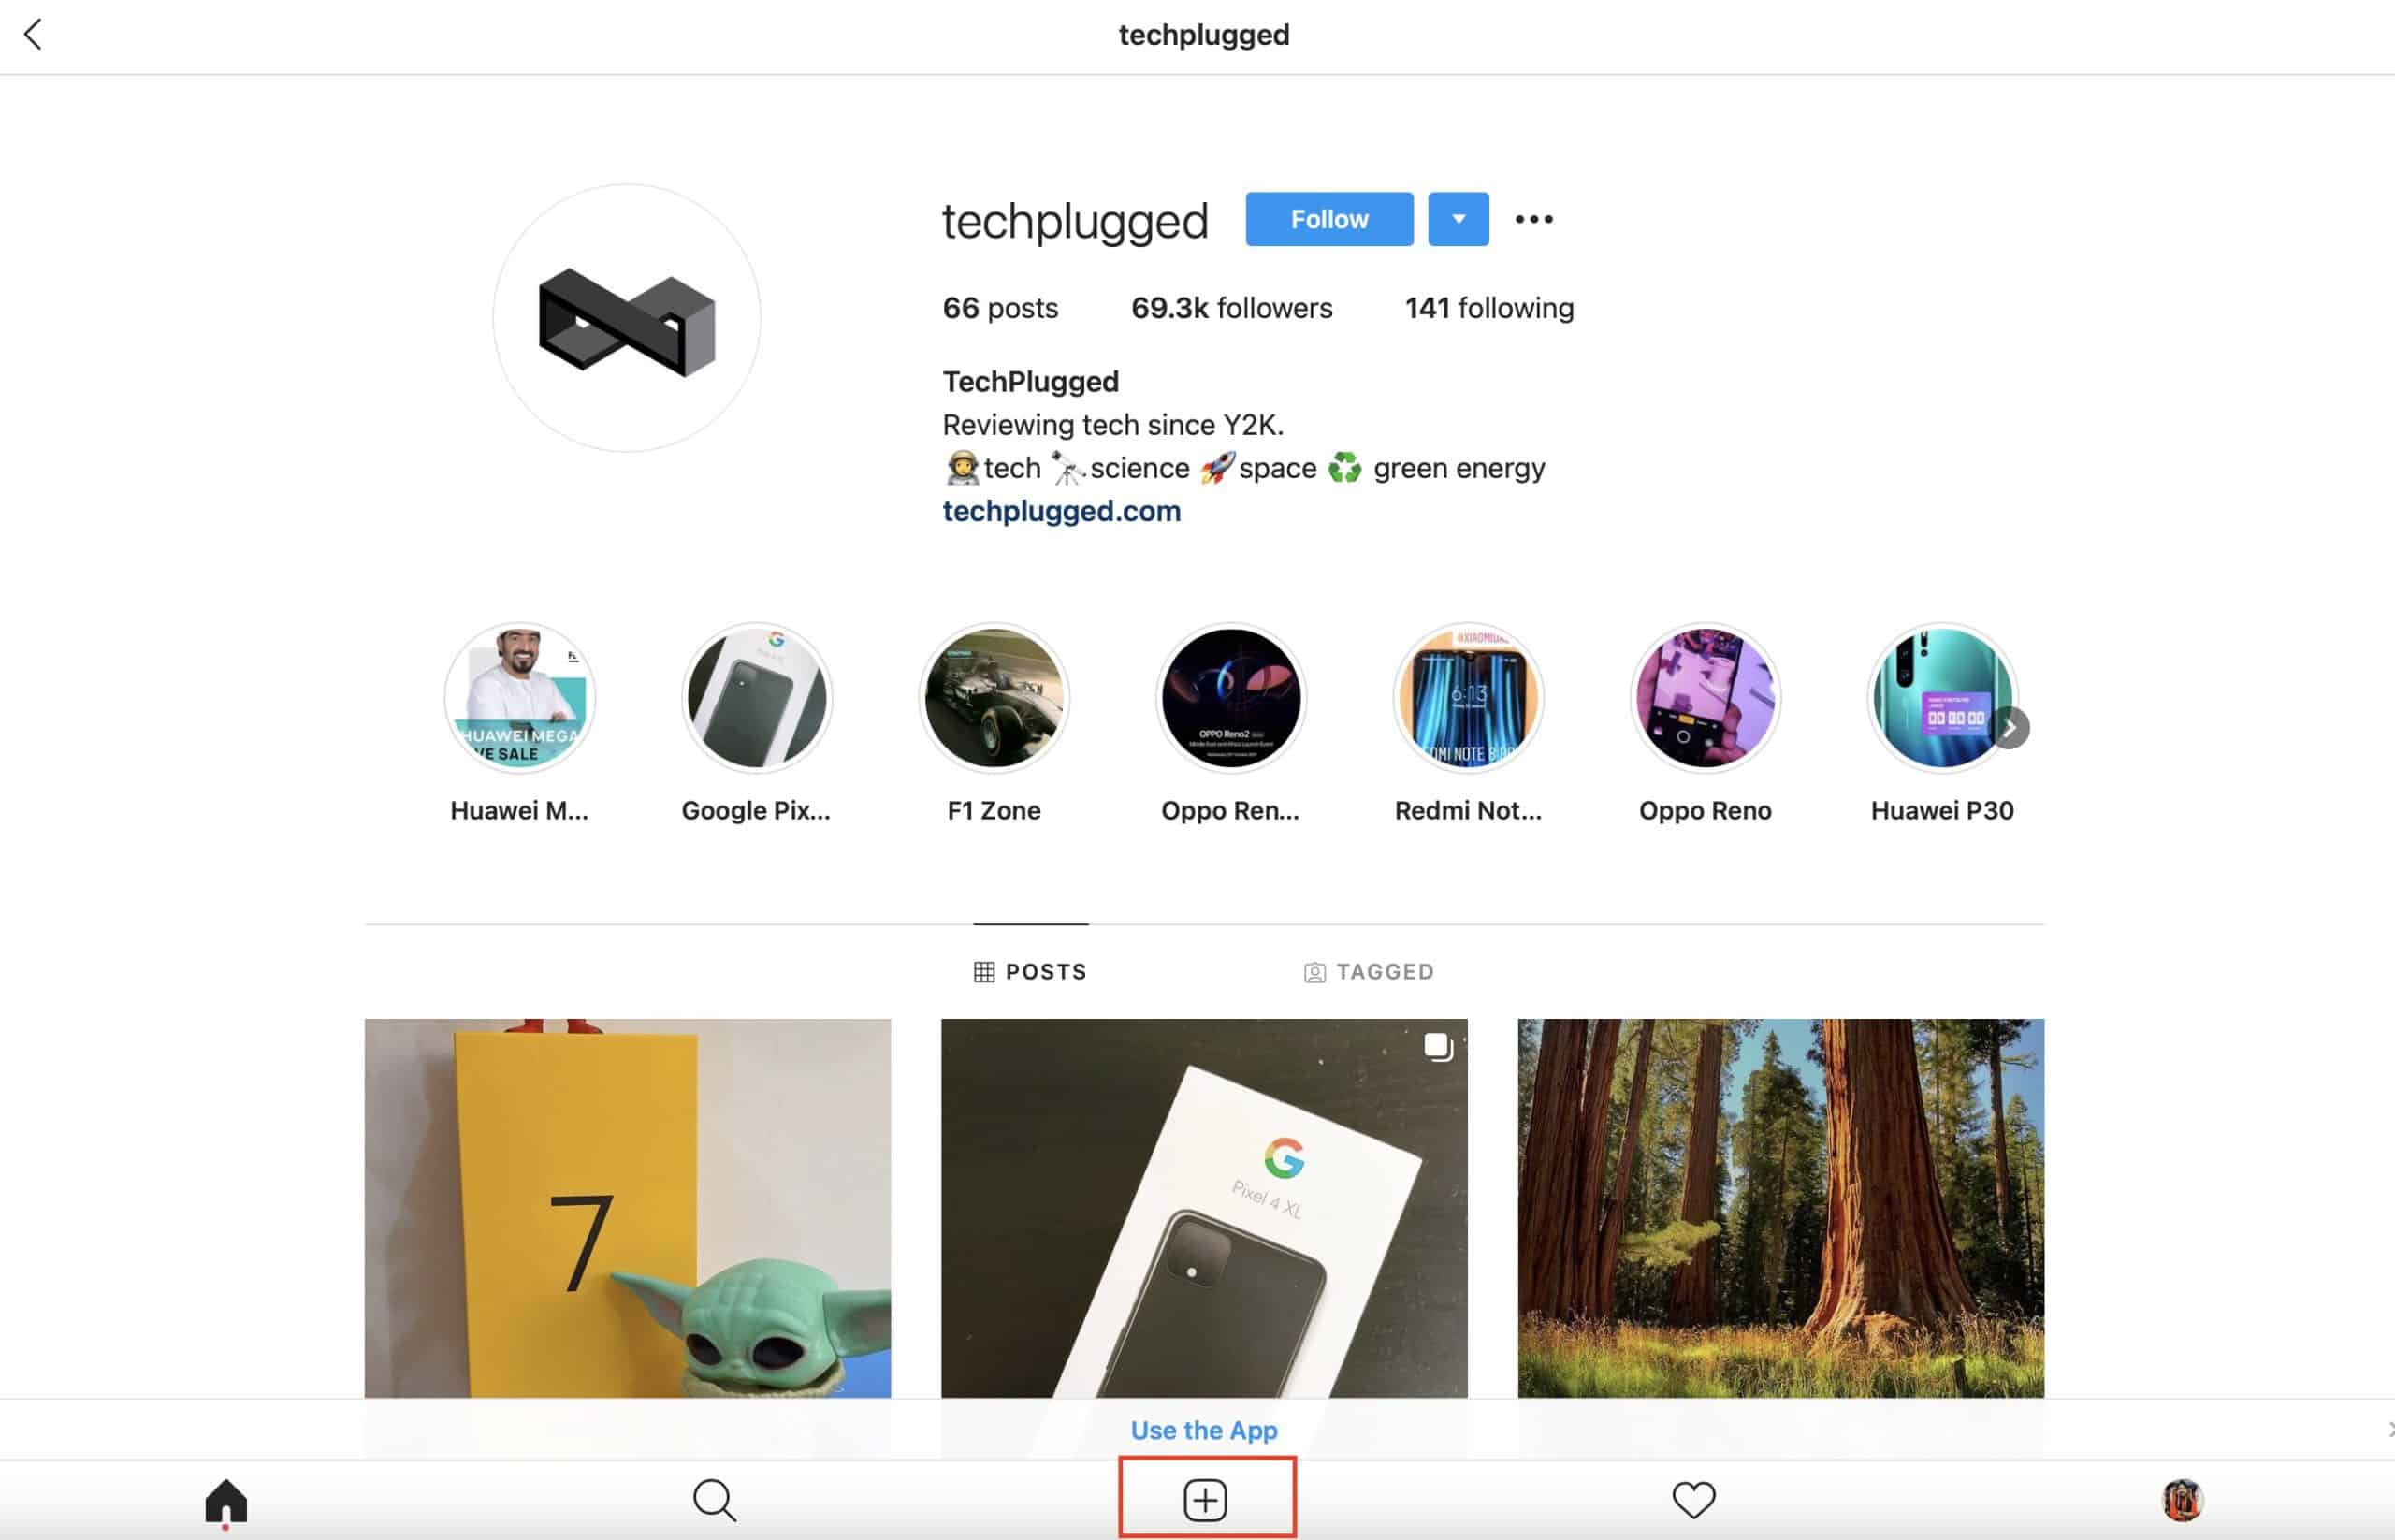 How to upload to Instagram using the Mac